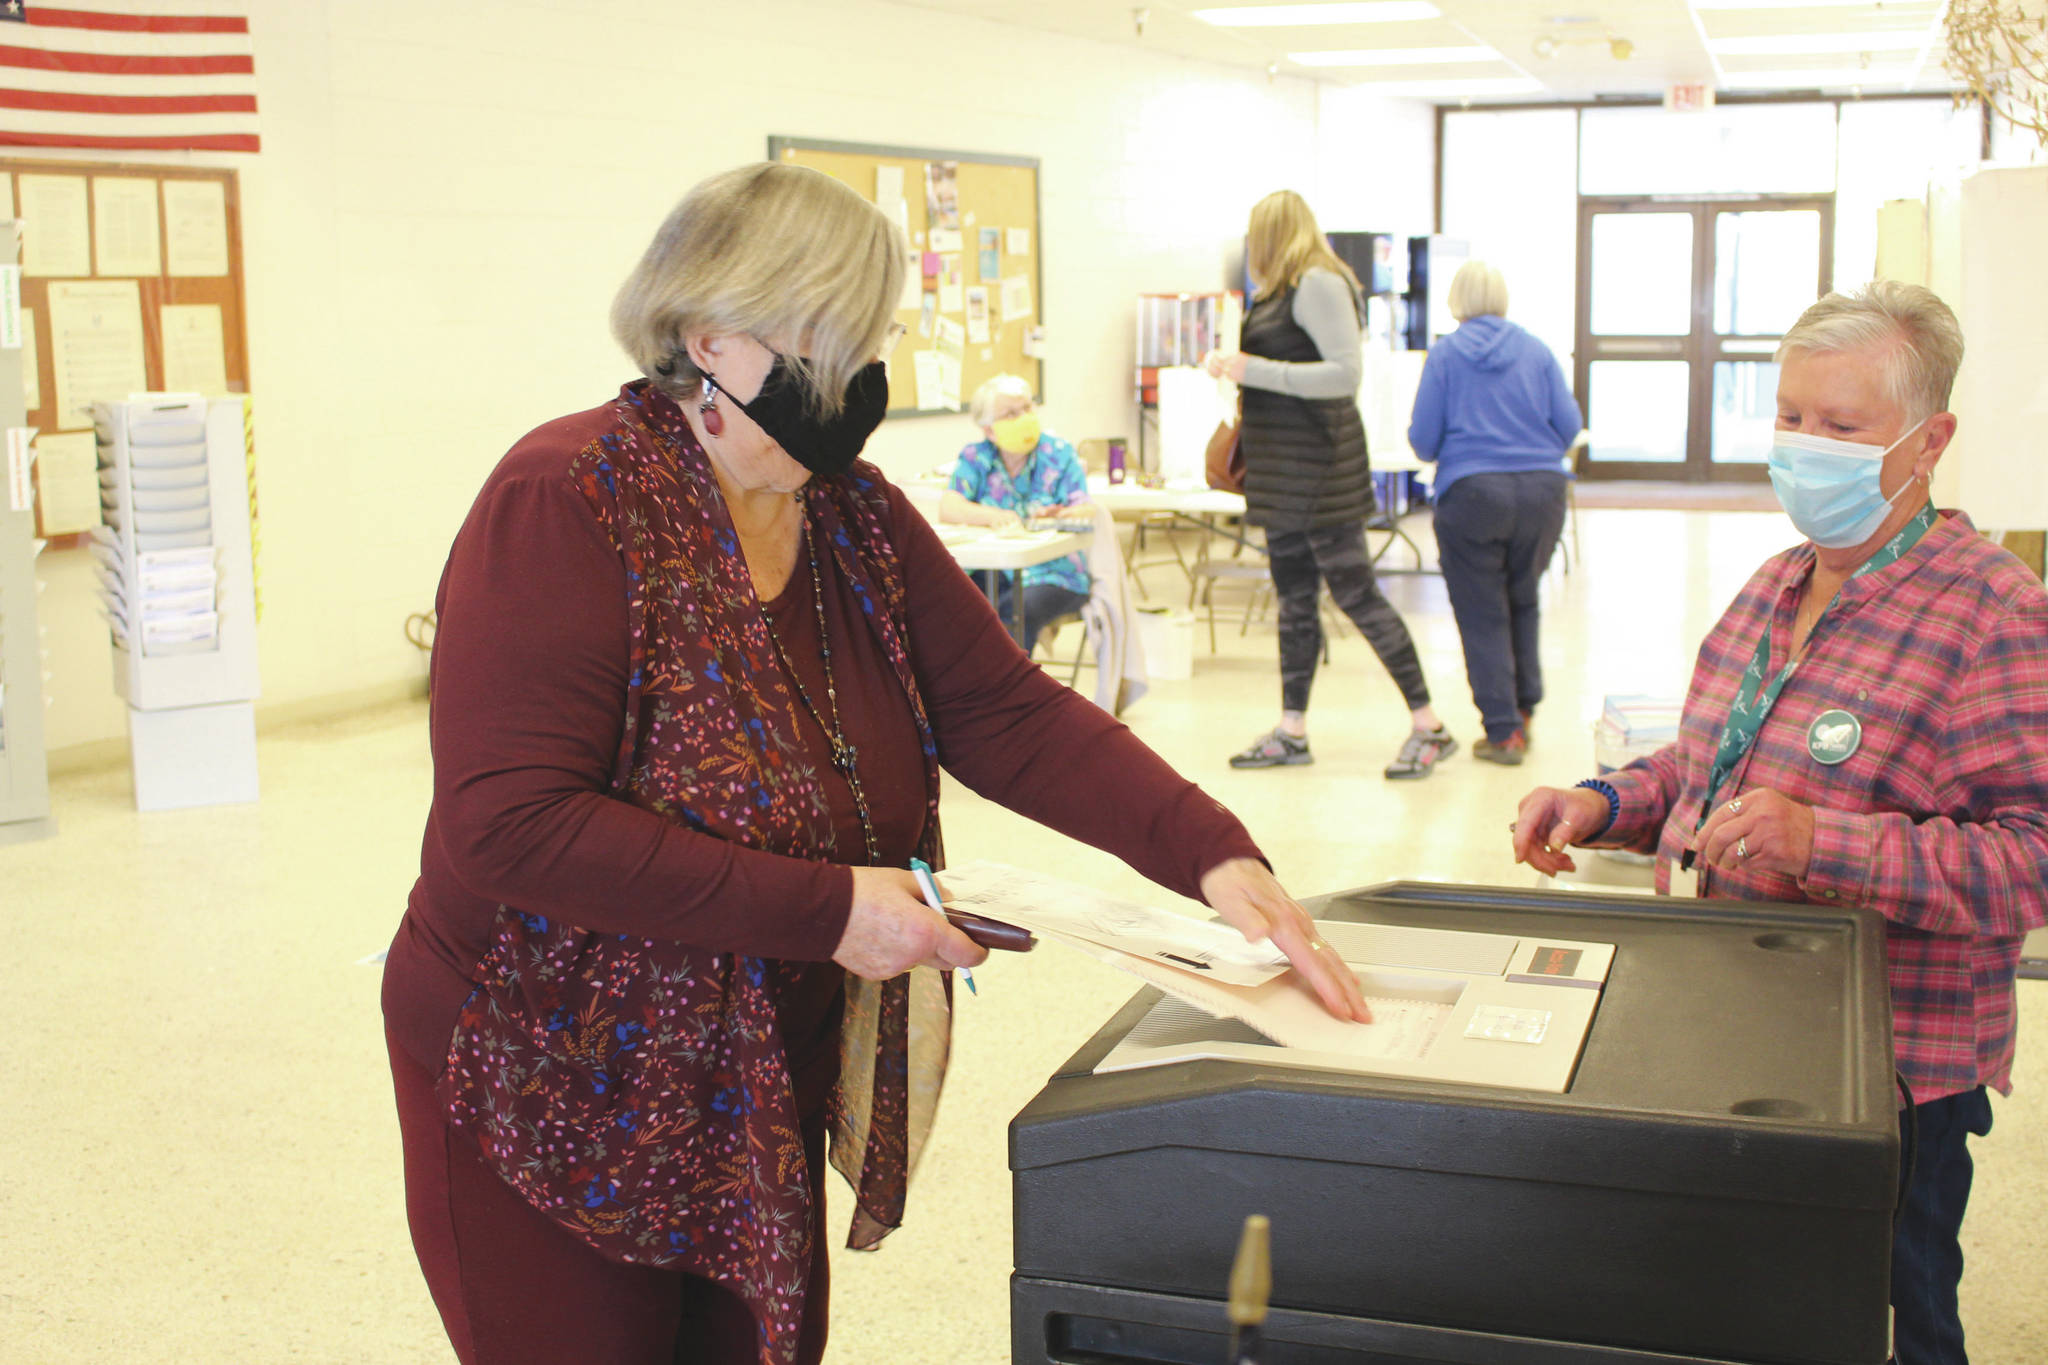 Brian Mazurek/Peninsula ClarionMarcia Heinrich casts her ballot for the municipal elections in Kenai on Tuesday.